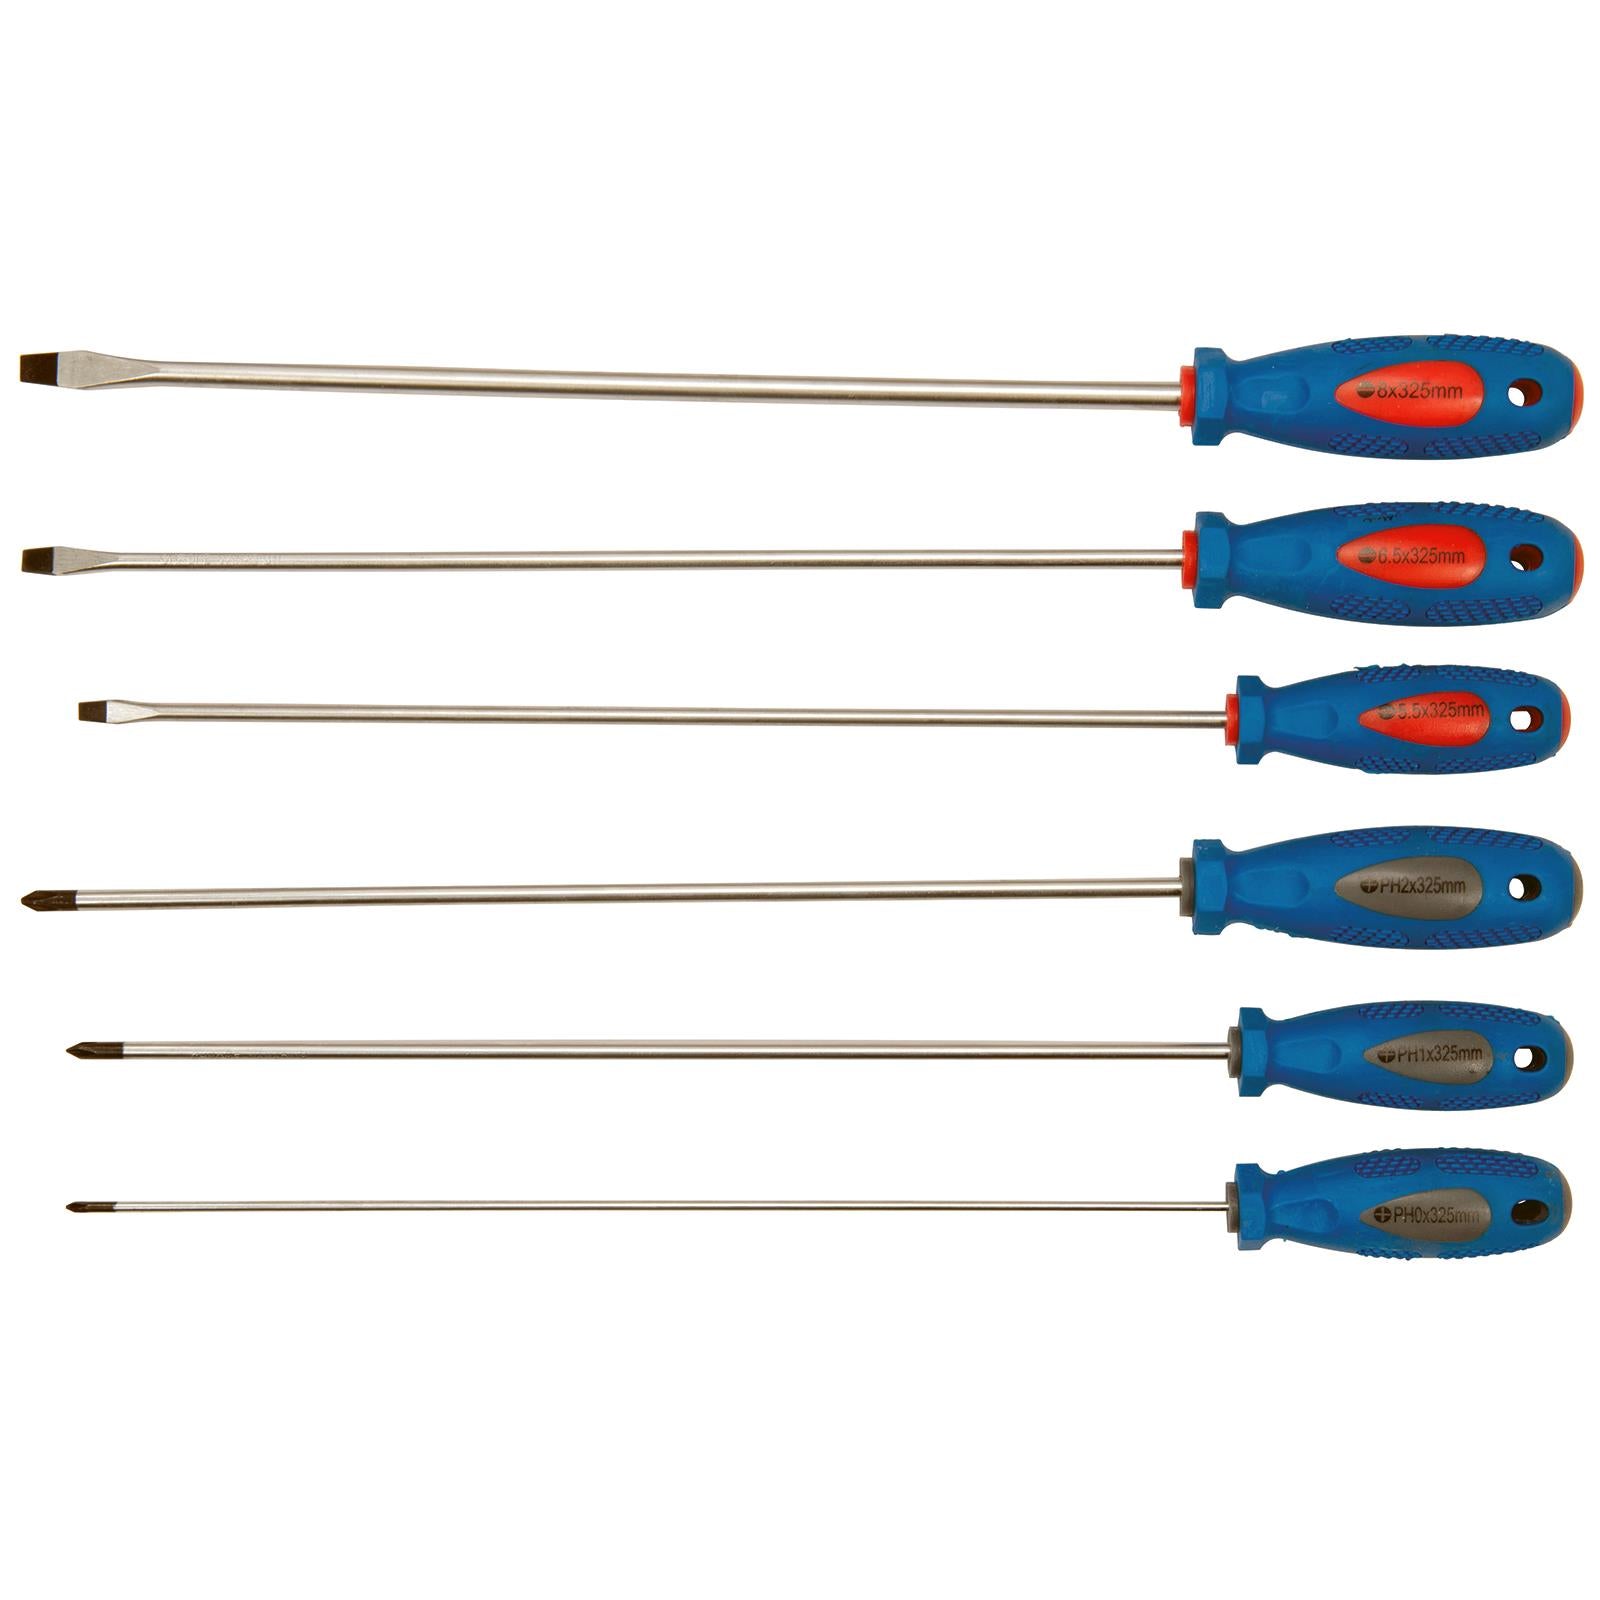 Silverline 6 Piece Extra-Long Screwdriver Set Slotted Phillips Magnetic Tips